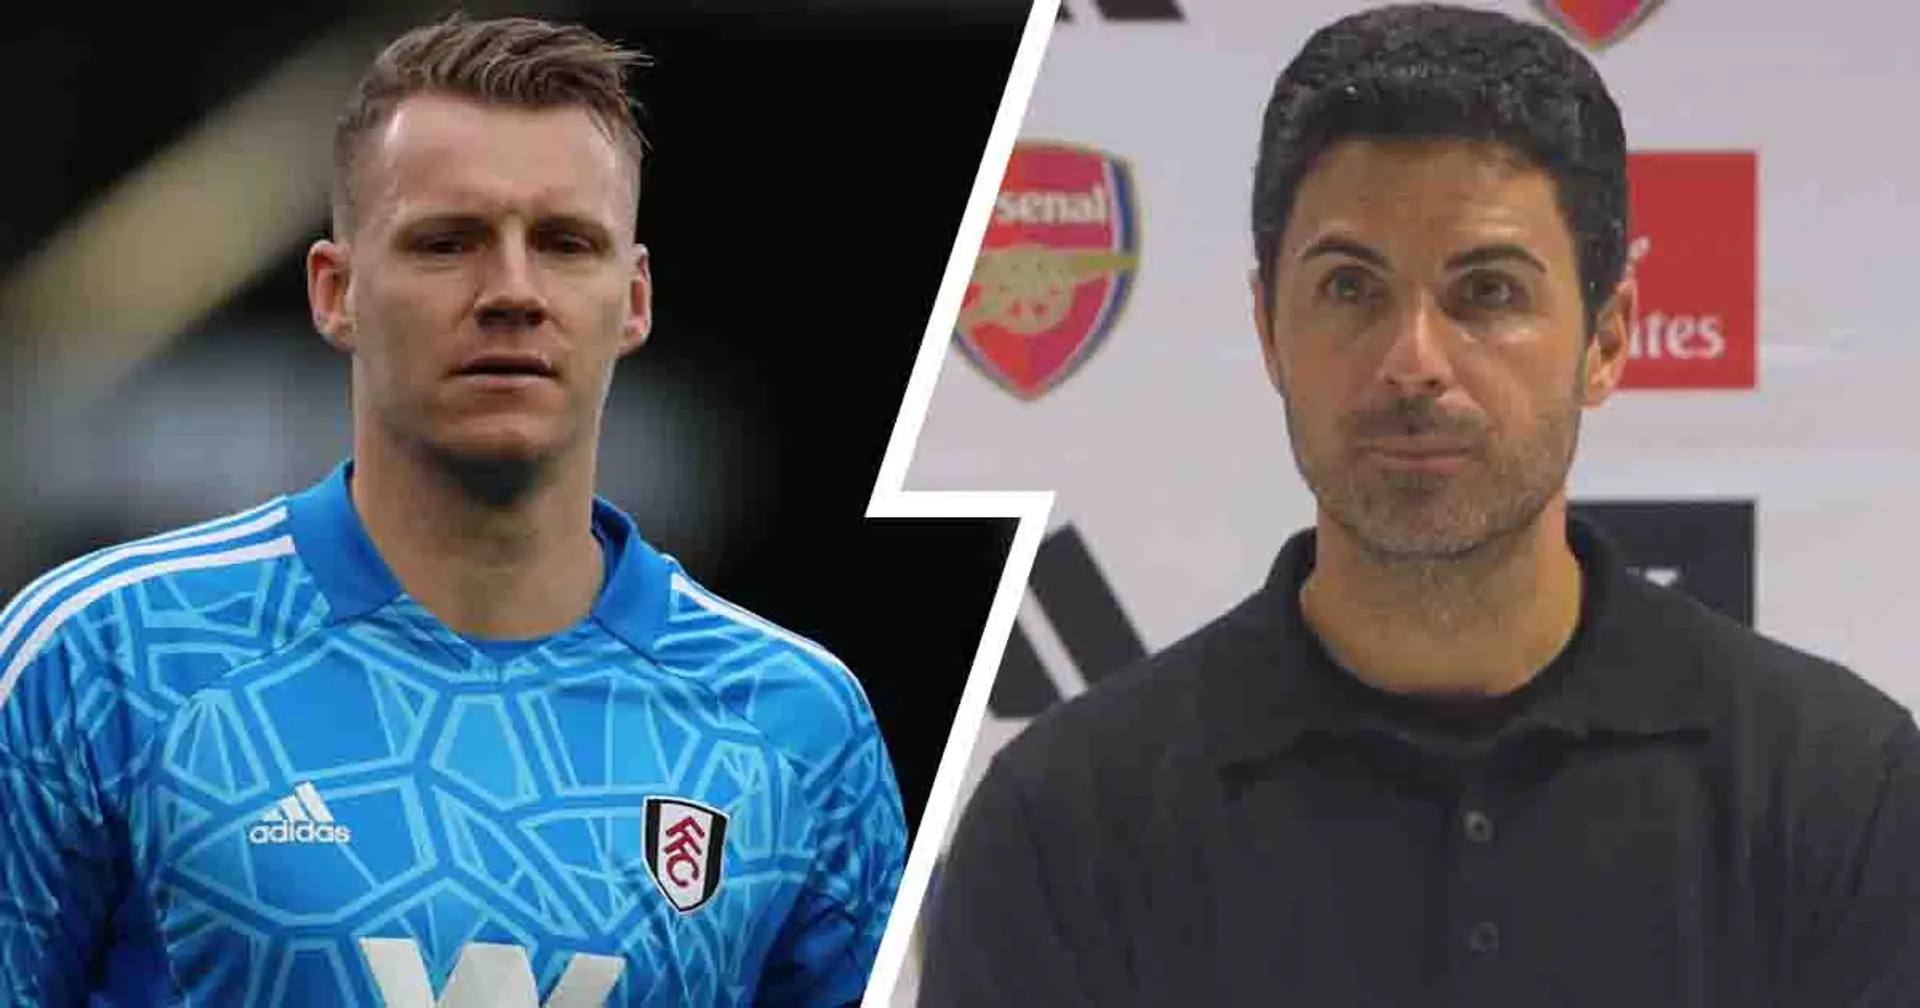 'Awful deal': Arsenal slammed for selling Bernd Leno last year